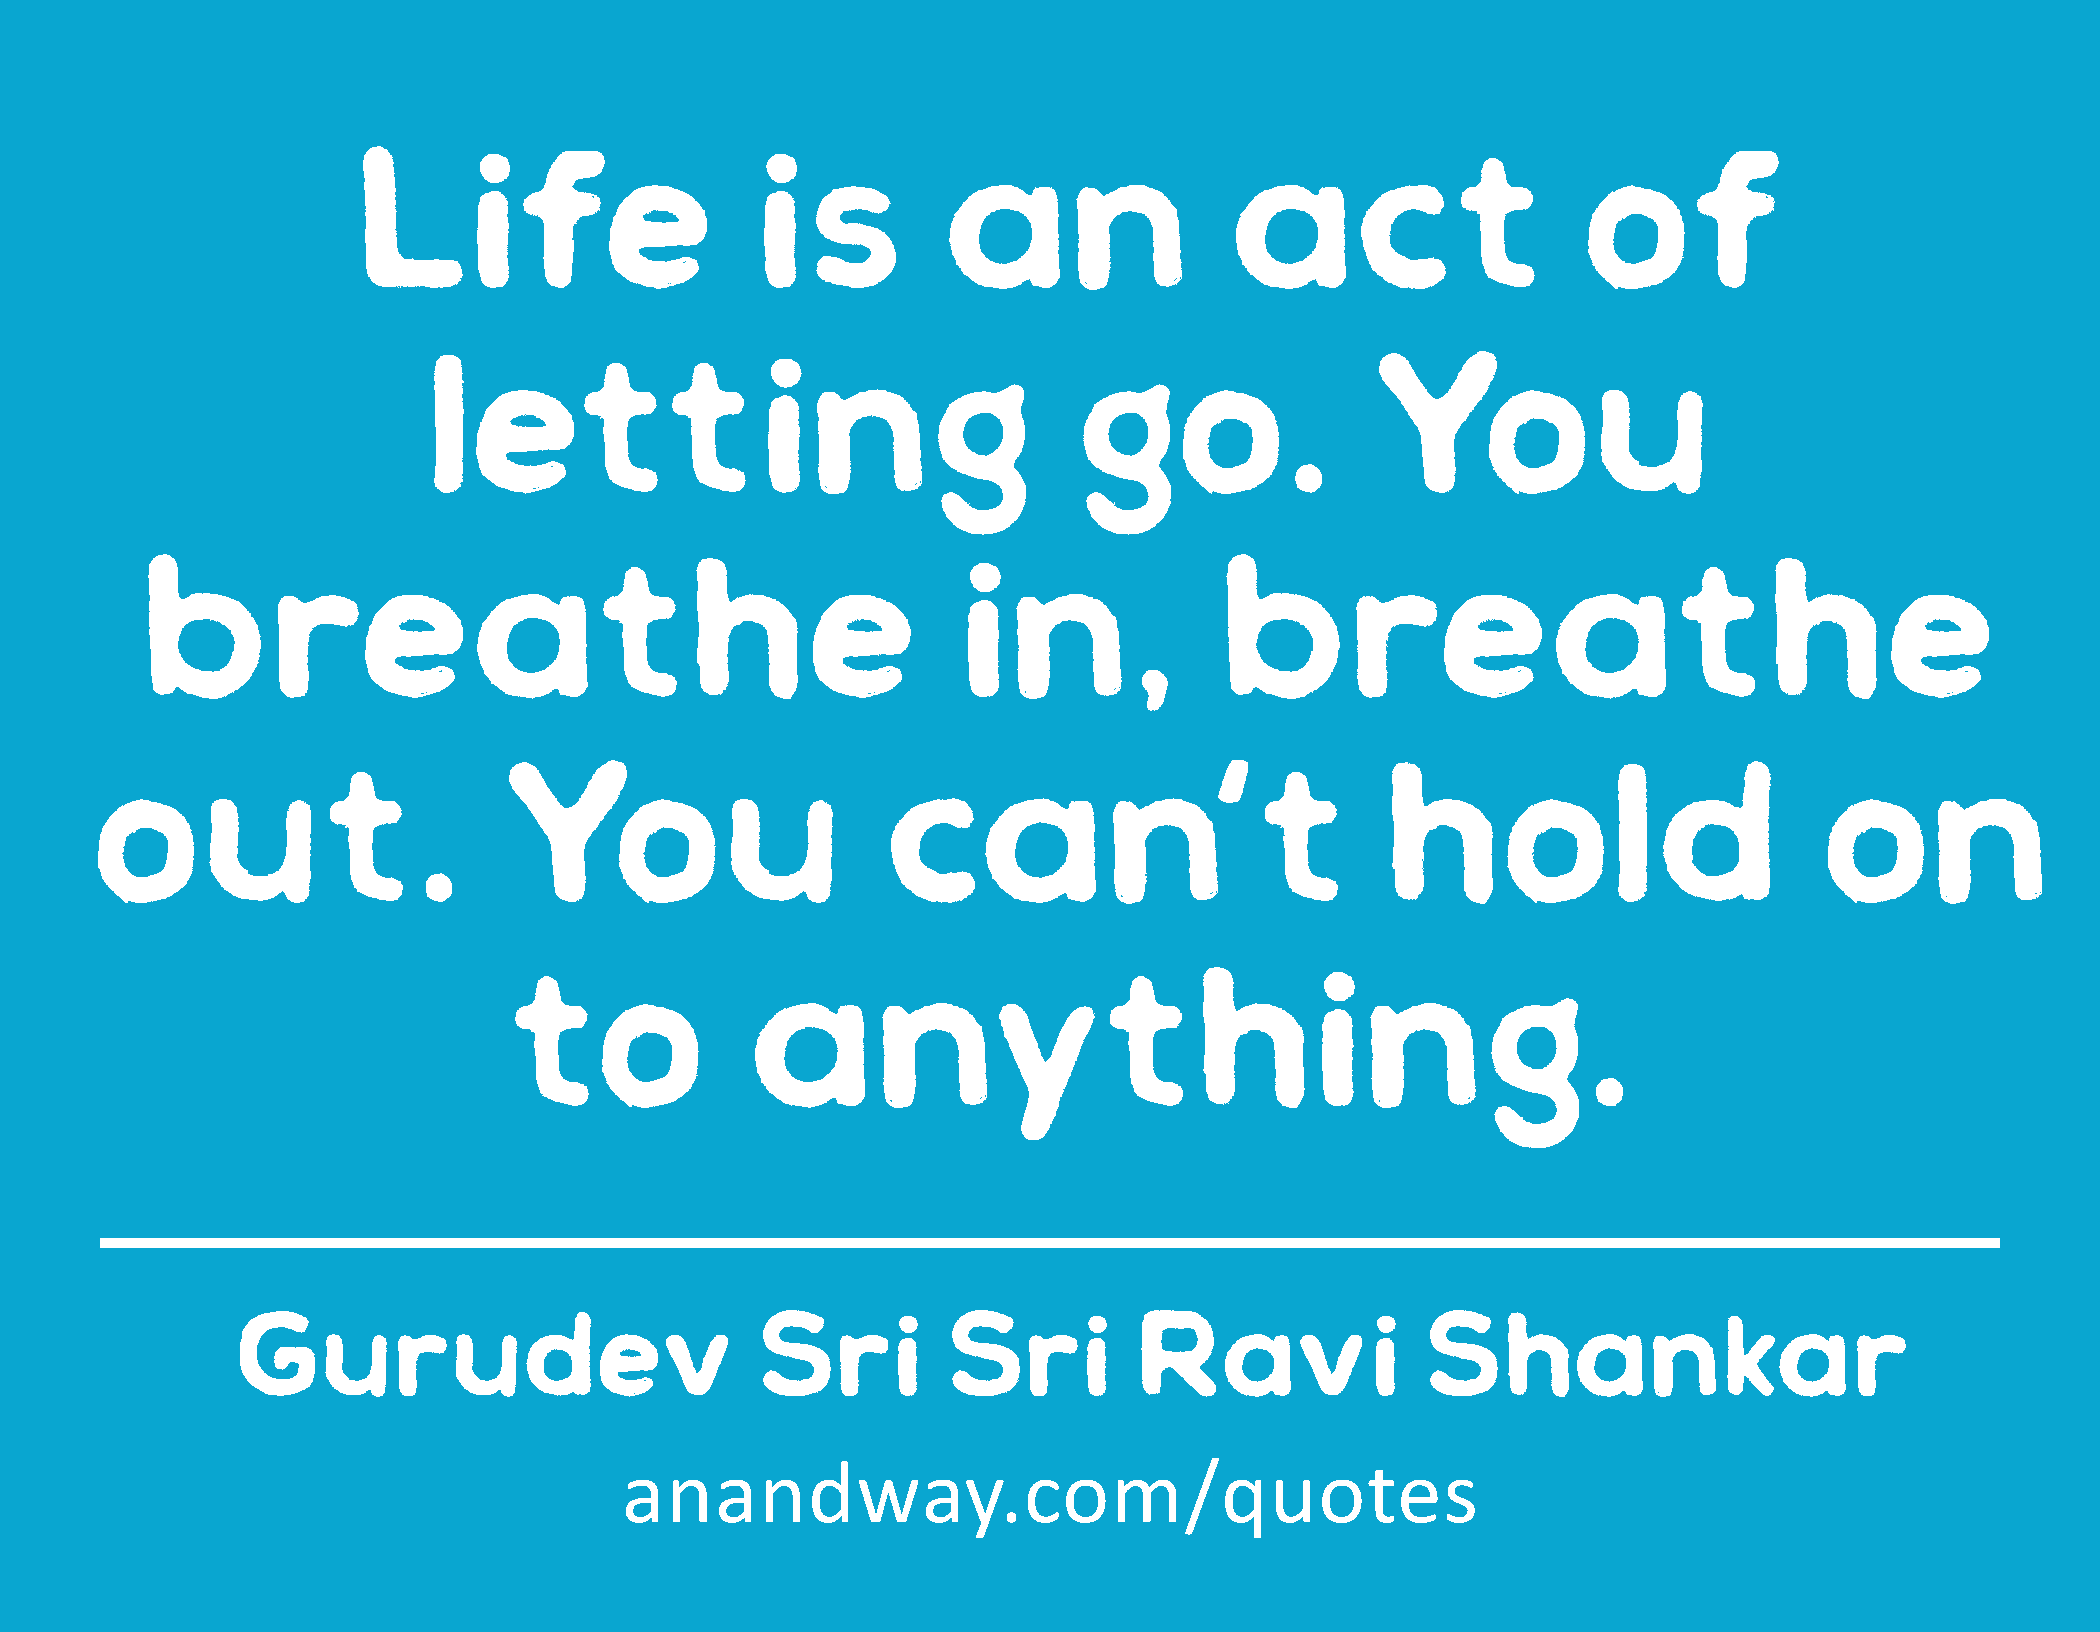 Life is an act of letting go. You breathe in, breathe out. You can't hold on to anything. 
 -Gurudev Sri Sri Ravi Shankar